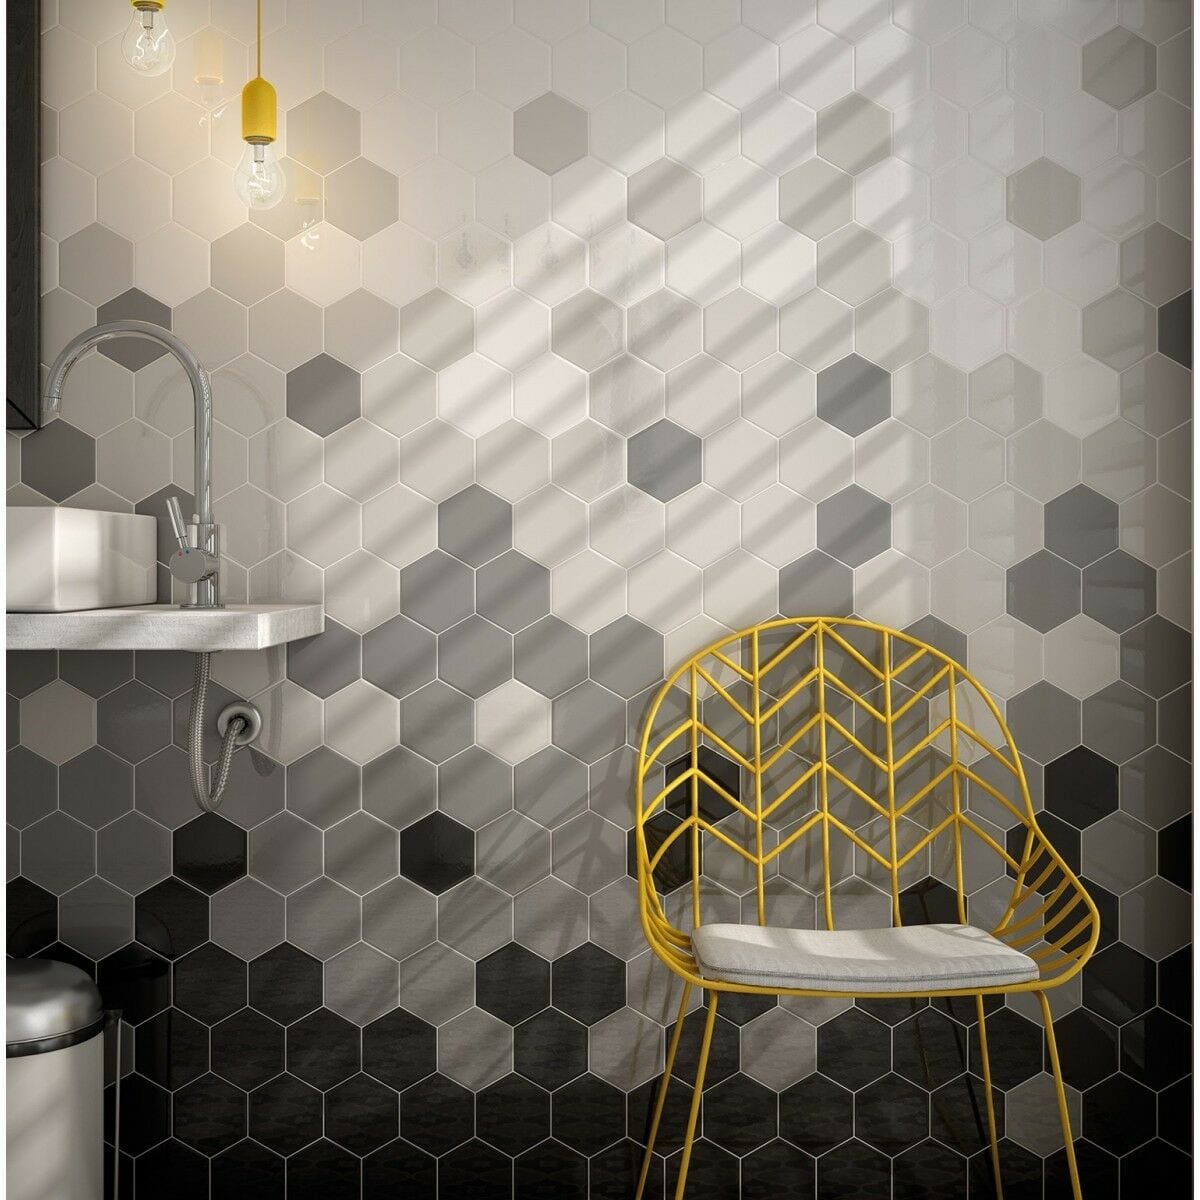 Black and Grey Hexagon shaped tiles in a modern bathroom